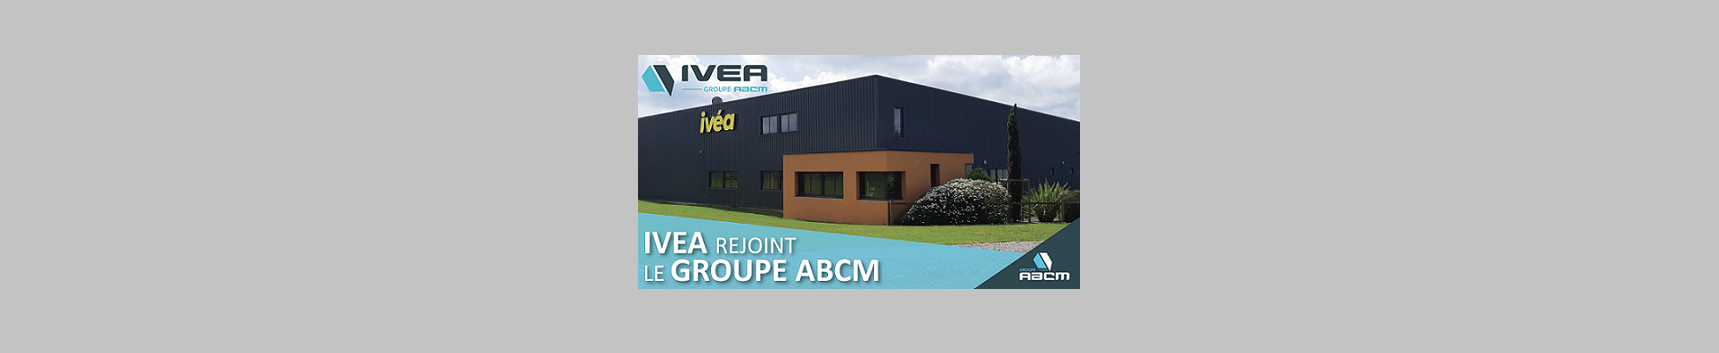 IVEA JOINS THE GROUP ABCM_1719X353-1